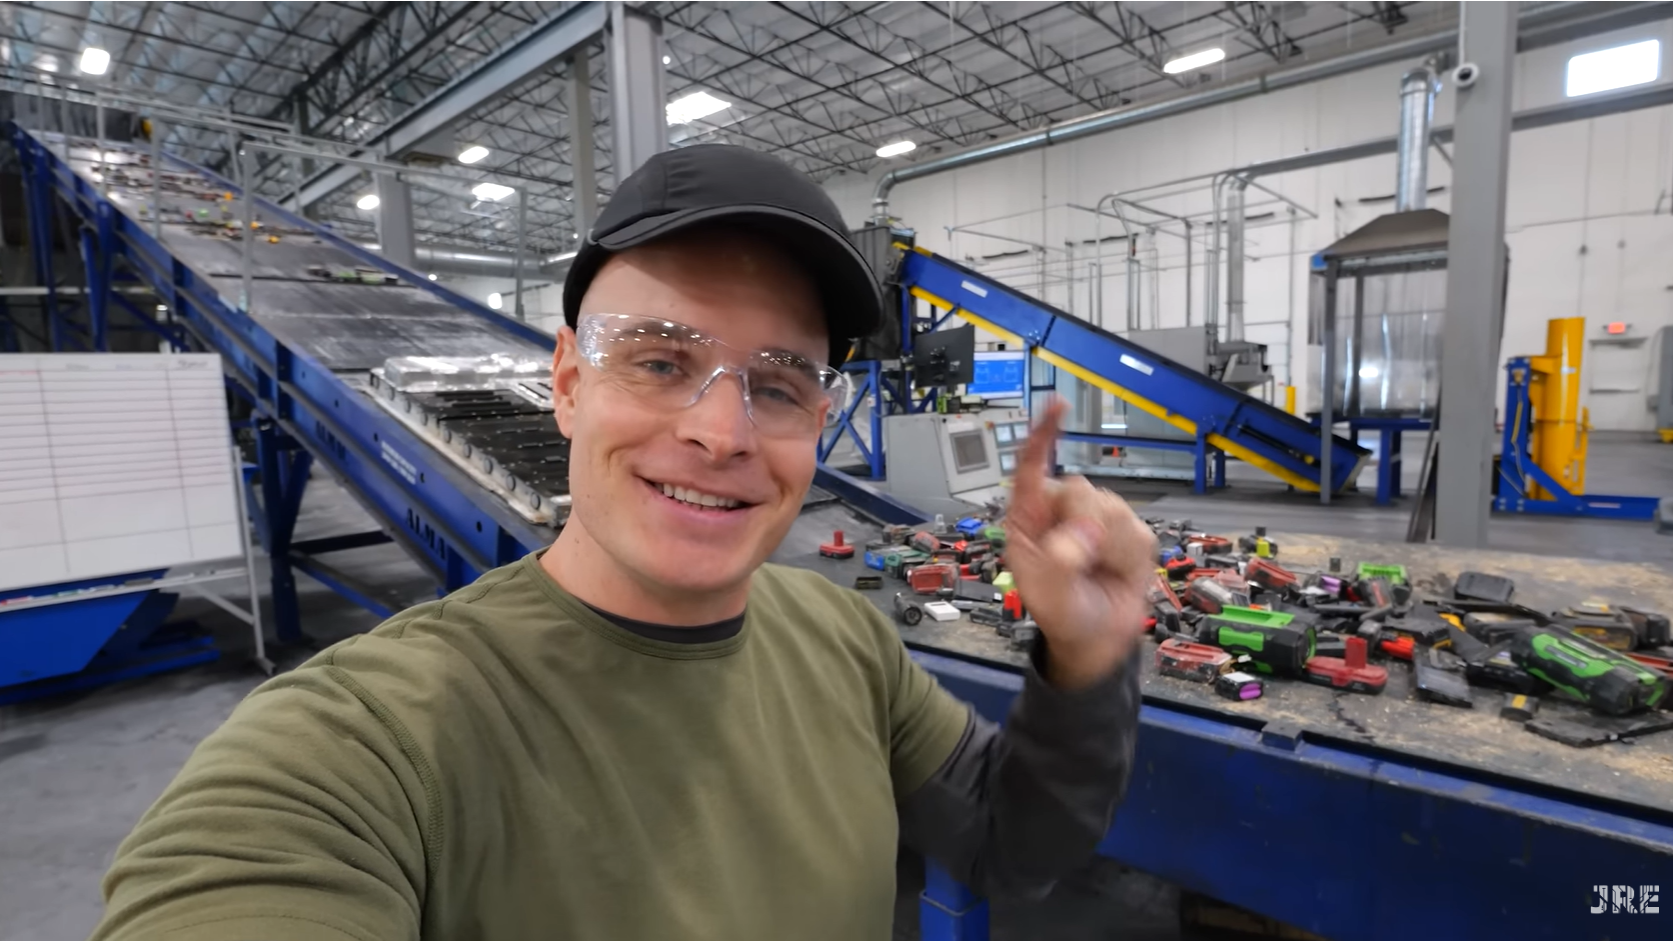 Man wearing safety goggles standing in front of conveyor belt wih various batteries on it.